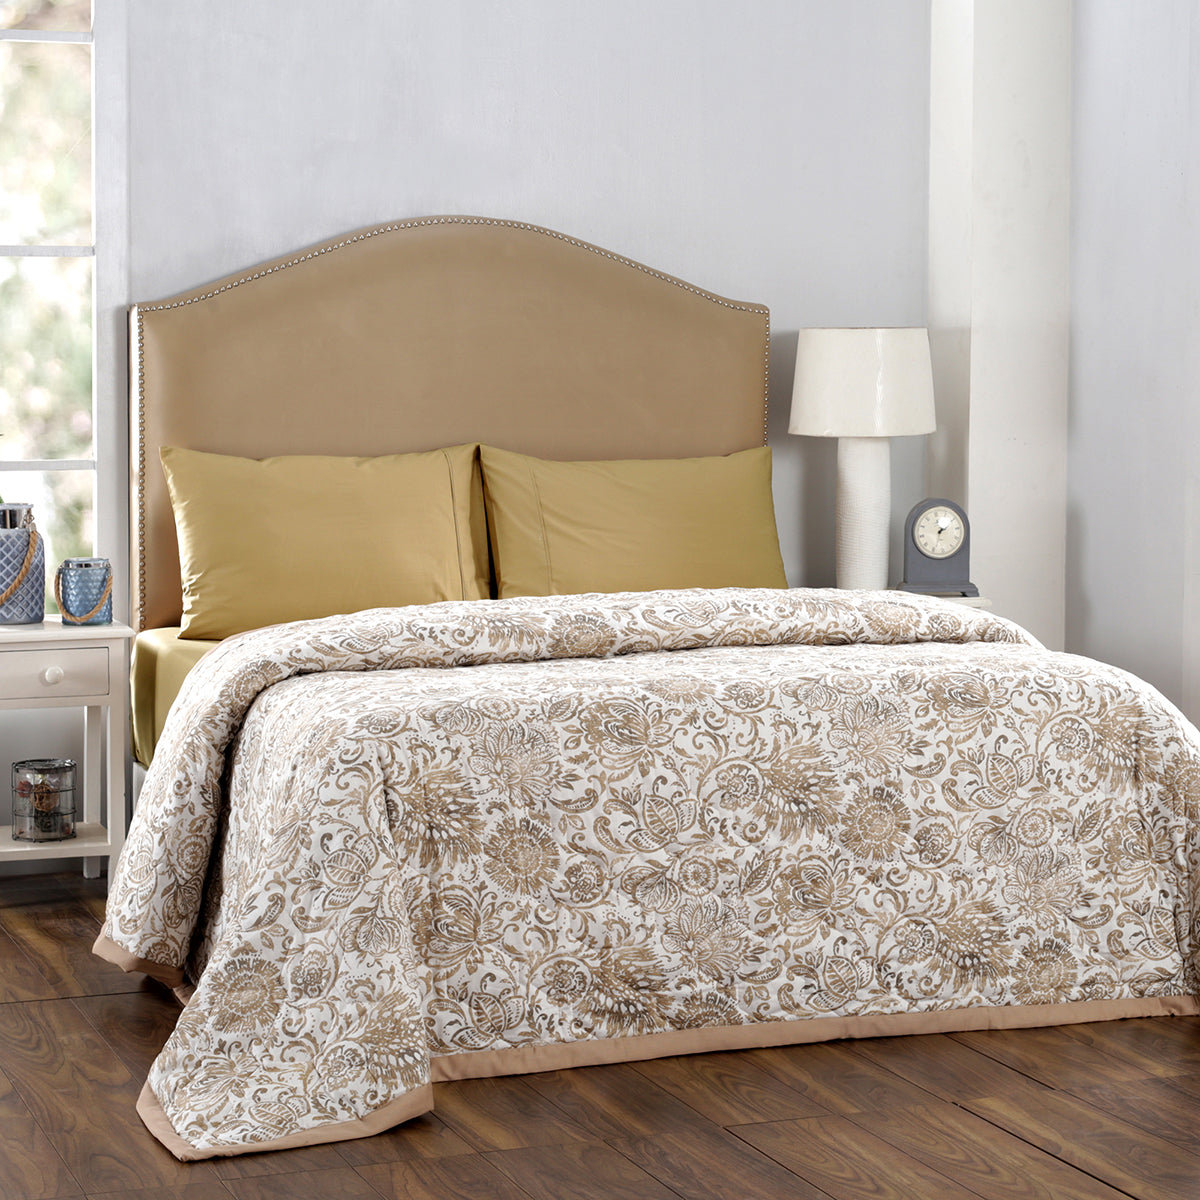 Meyer Zoe Flower Summer AC Quilt/Quilted Bed Cover/Comforter Neutral